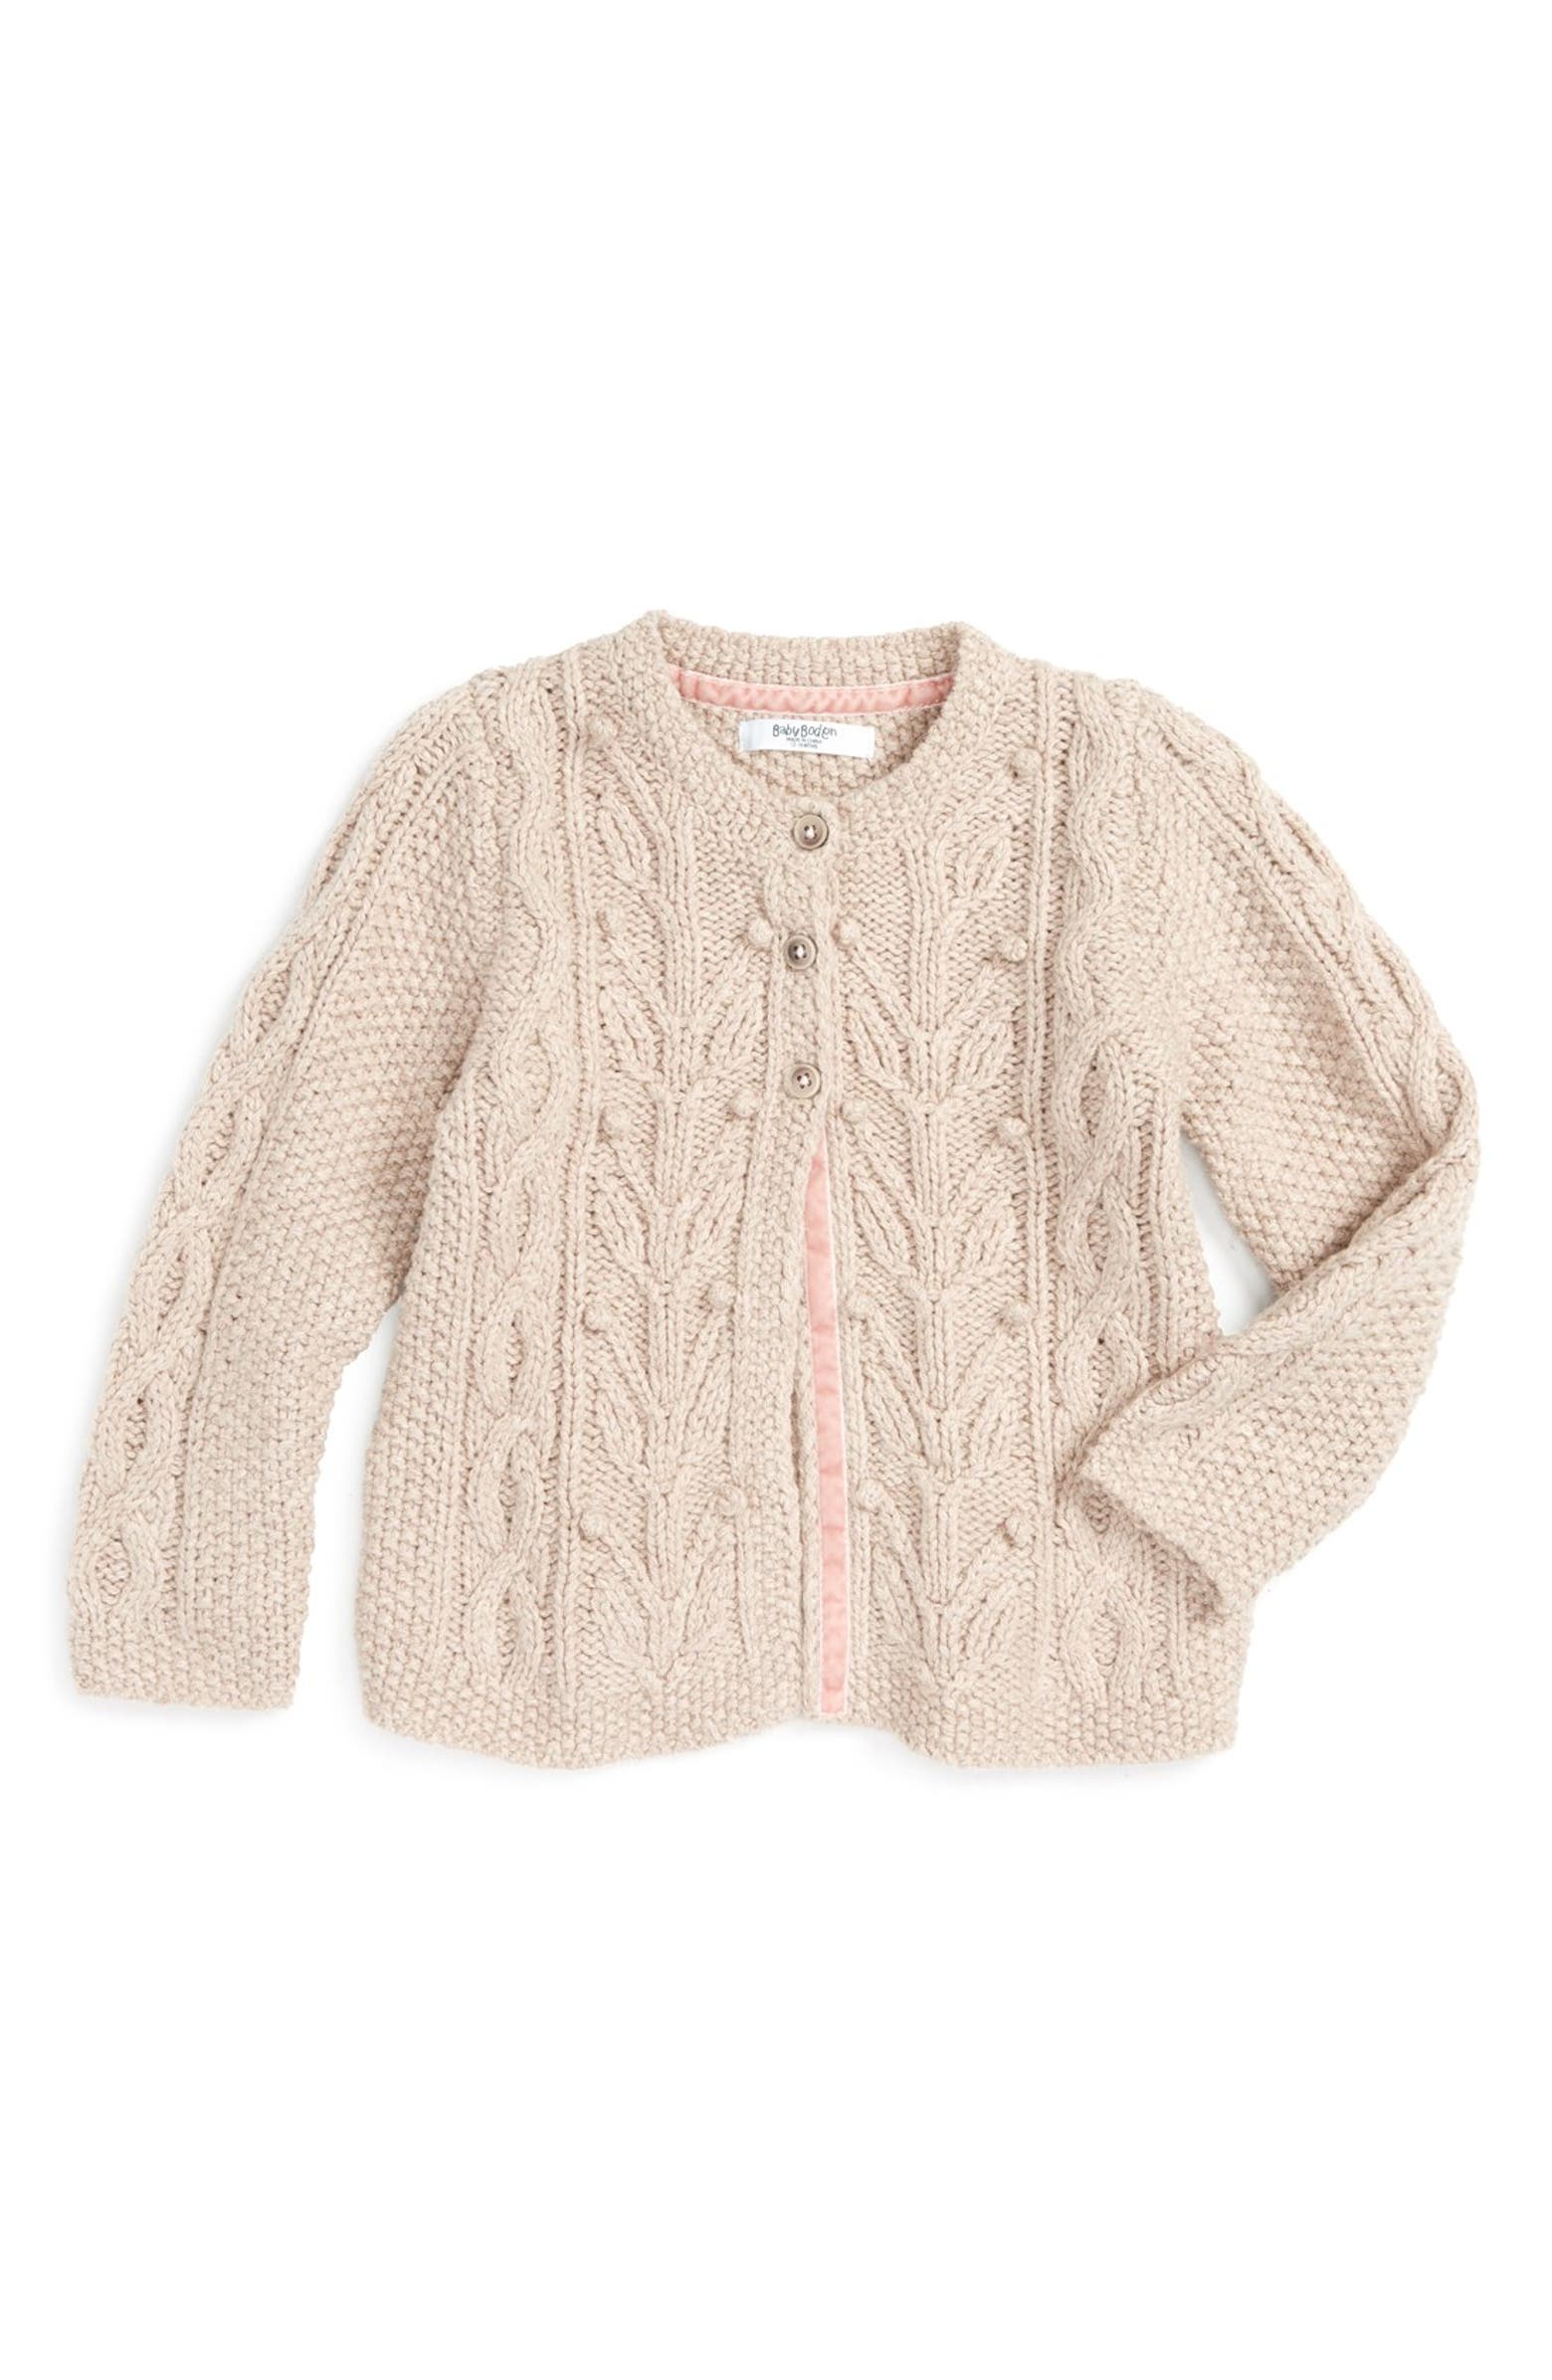 Mini Boden Cable Knit Cardigan (Baby Girls & Toddler Girls) | Nordstrom